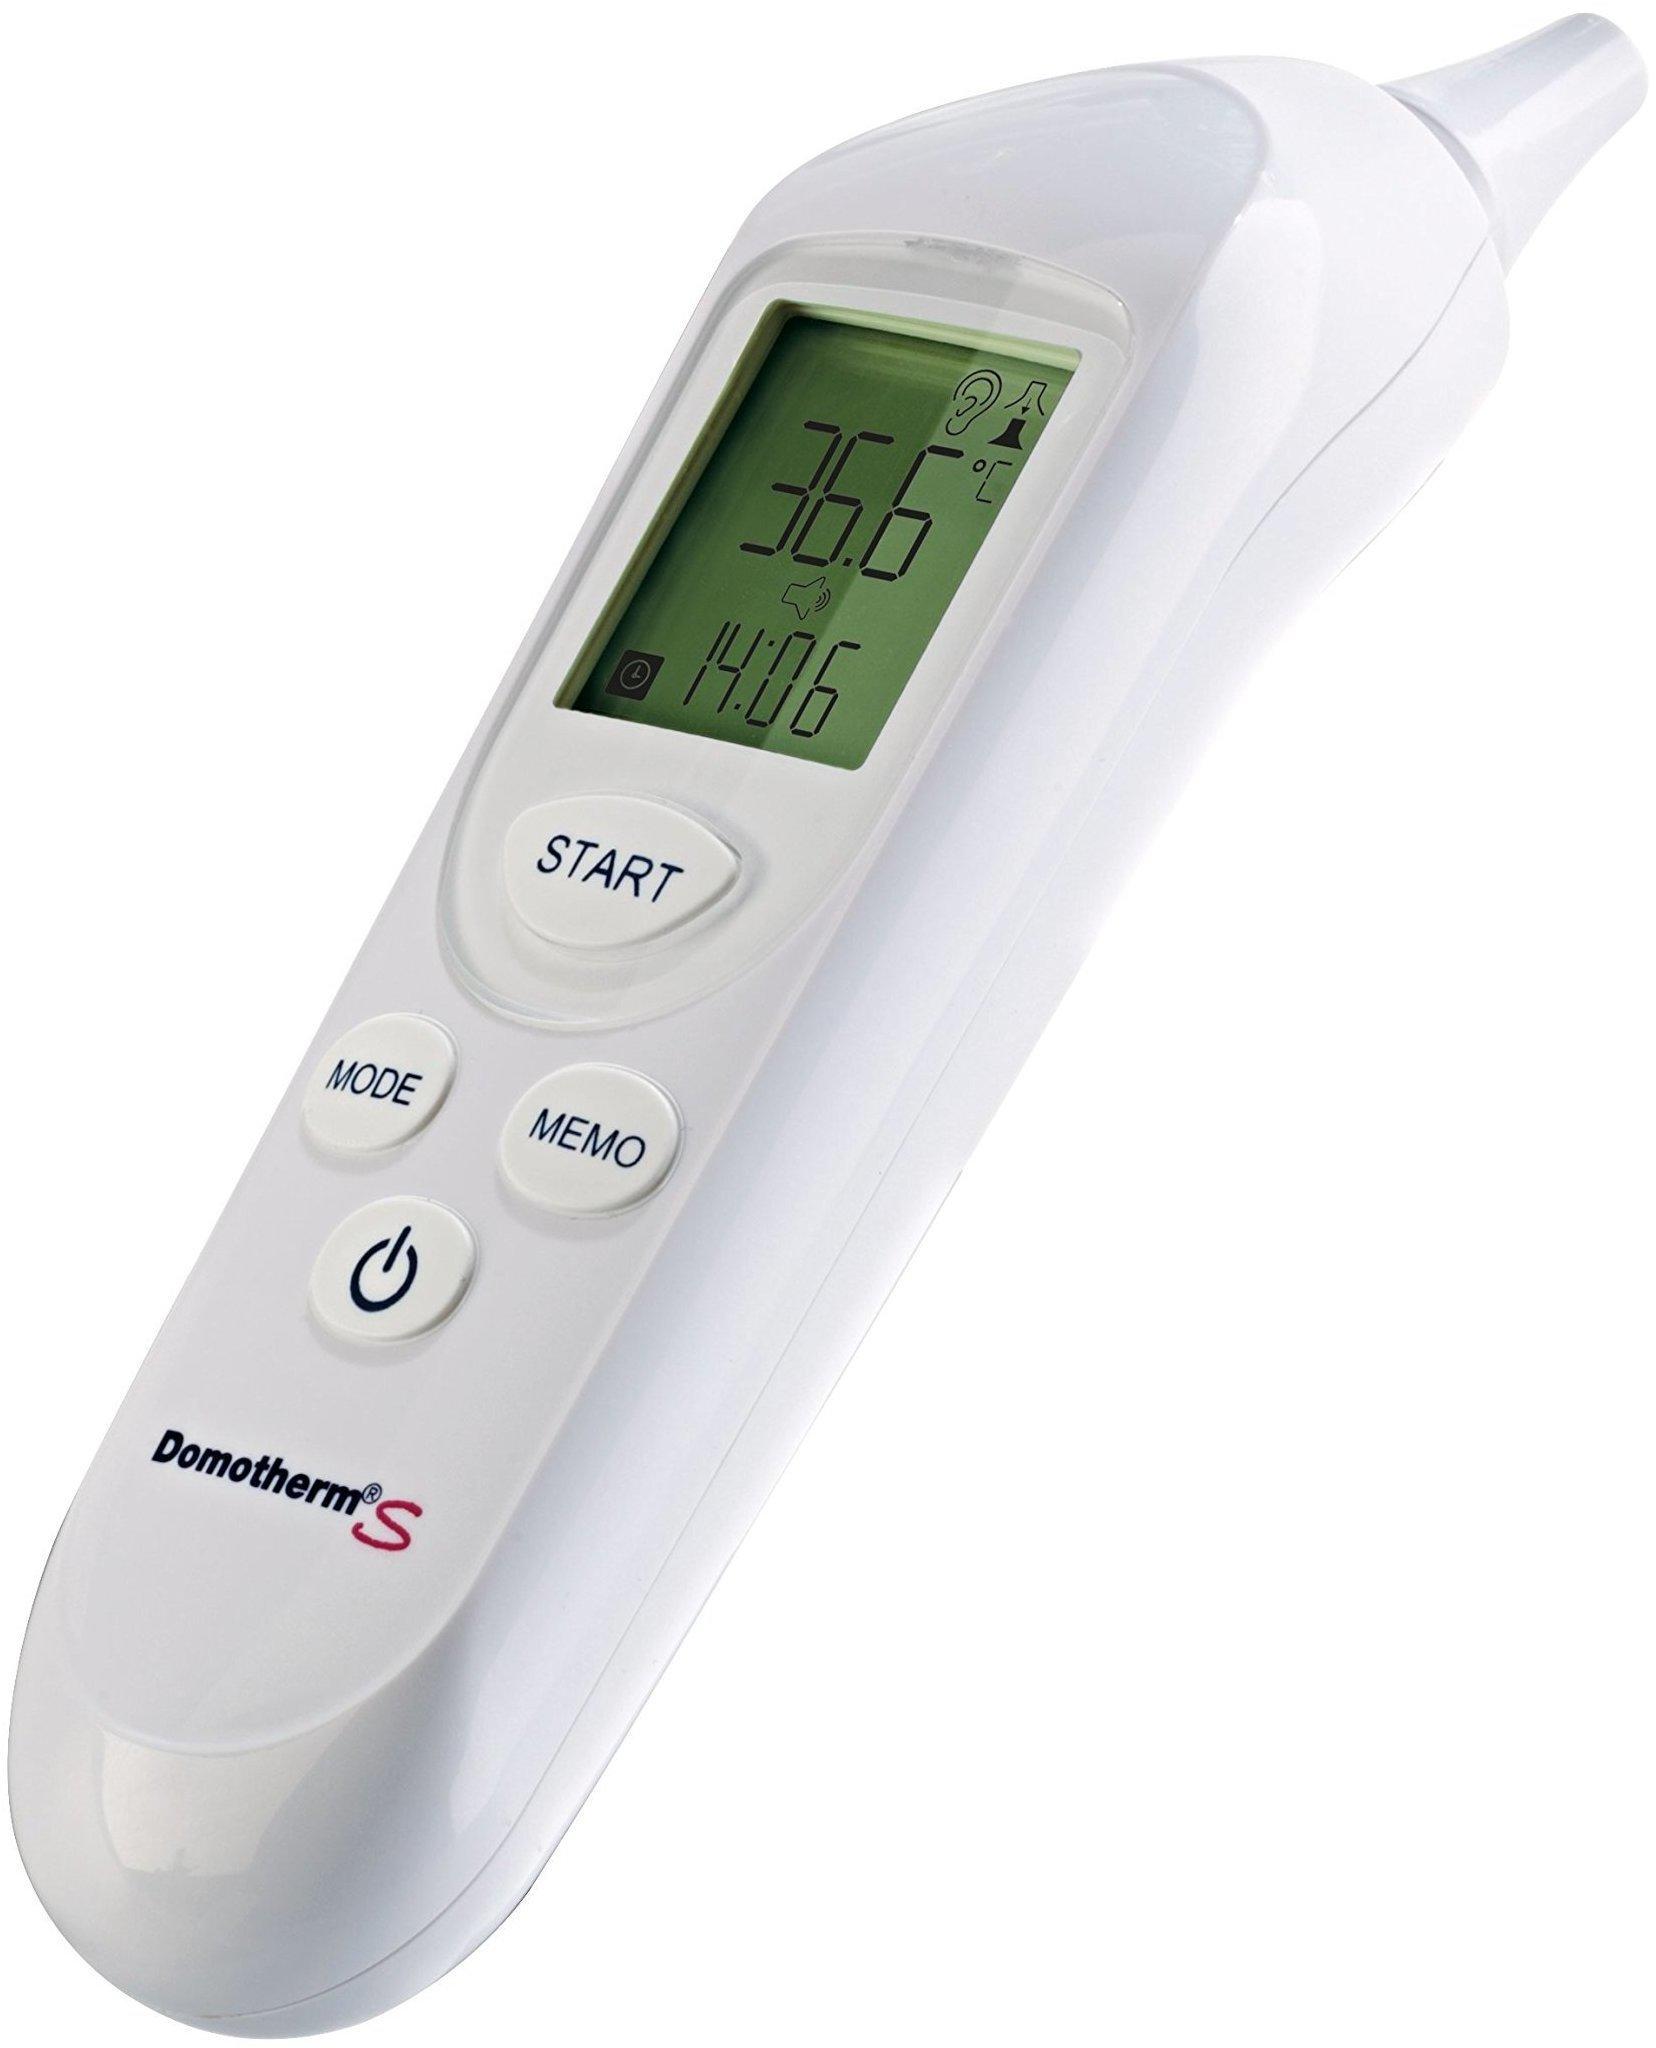 Uebe Domotherm S Infrarot-ohrthermometer Test TOP Angebote ab 29,79 €  (April 2023)